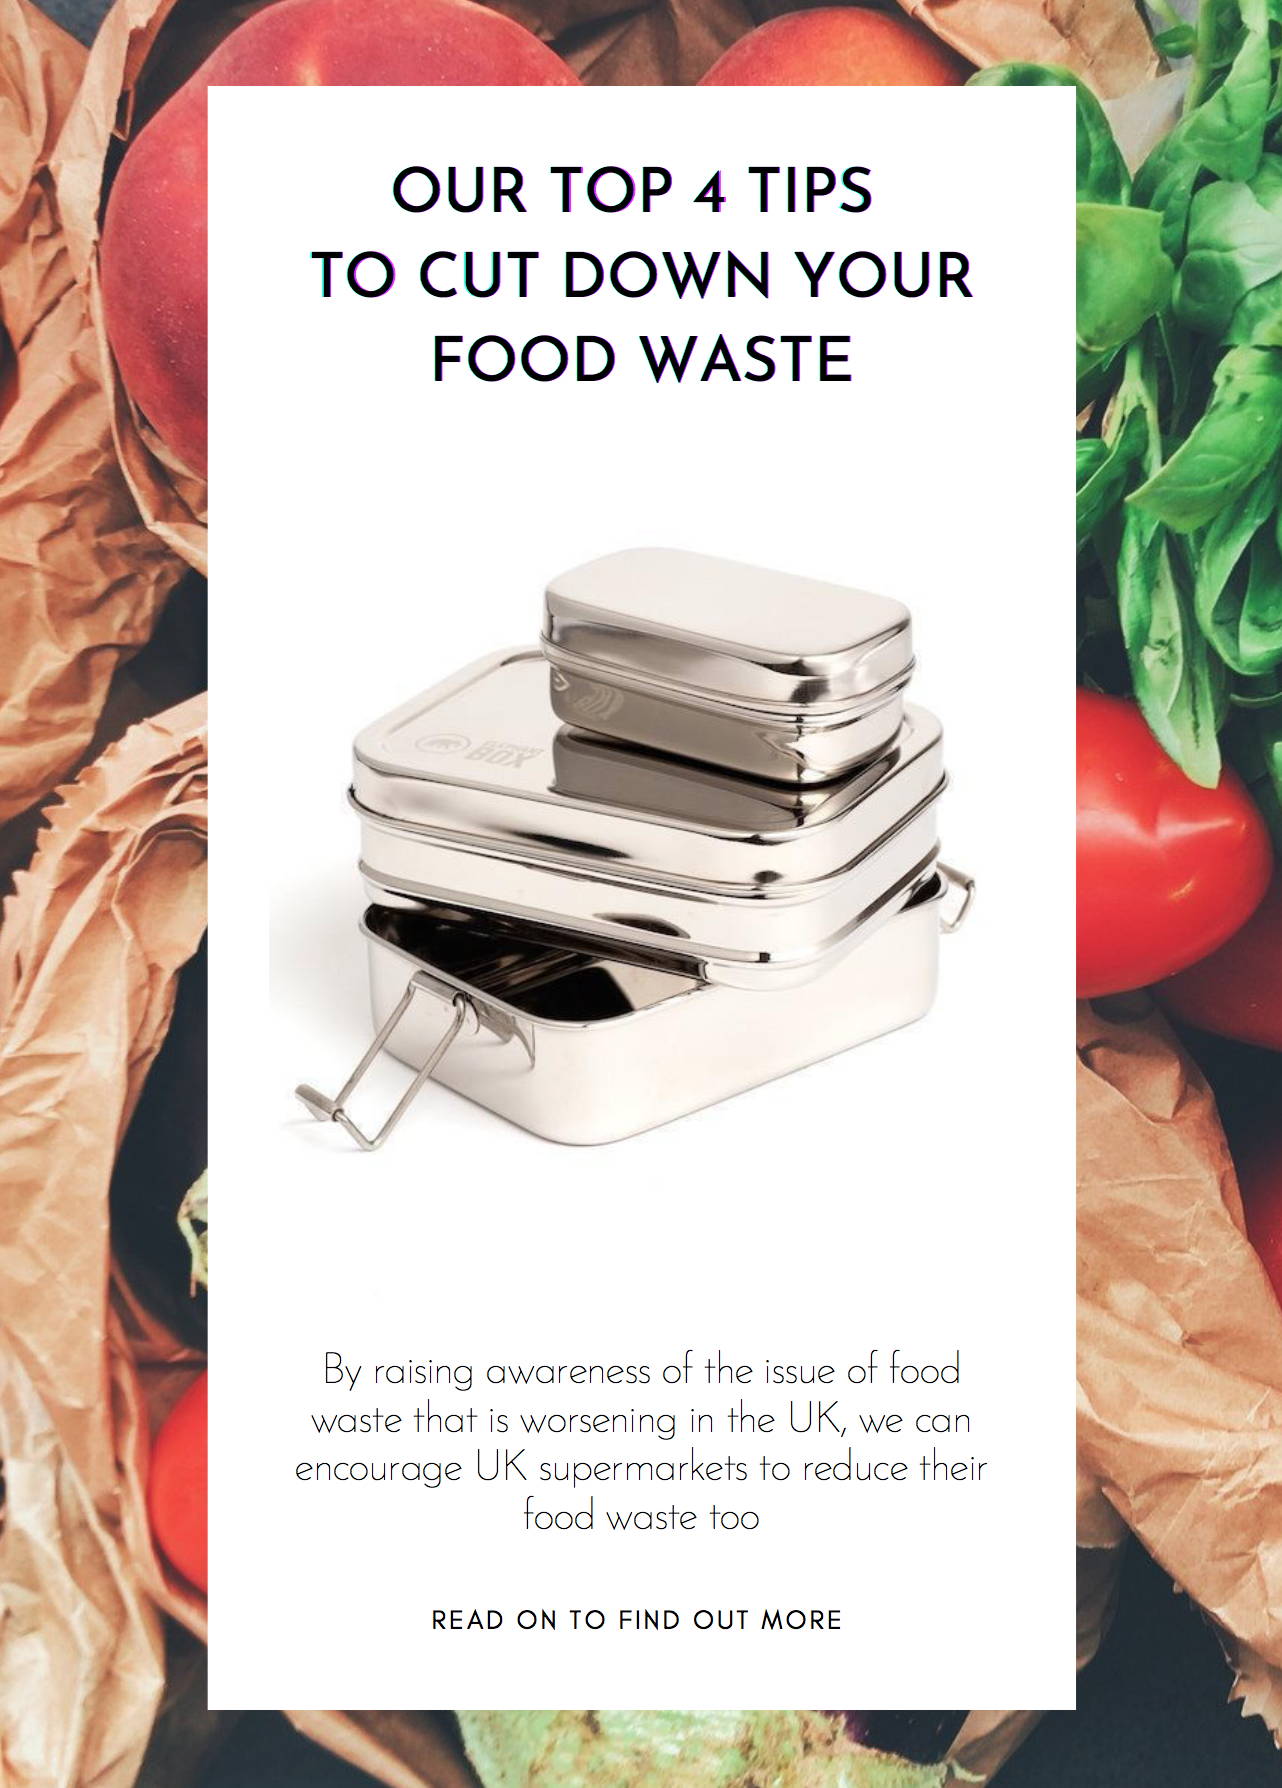 Our Top 4 Tips To Cut Down Your Food Waste